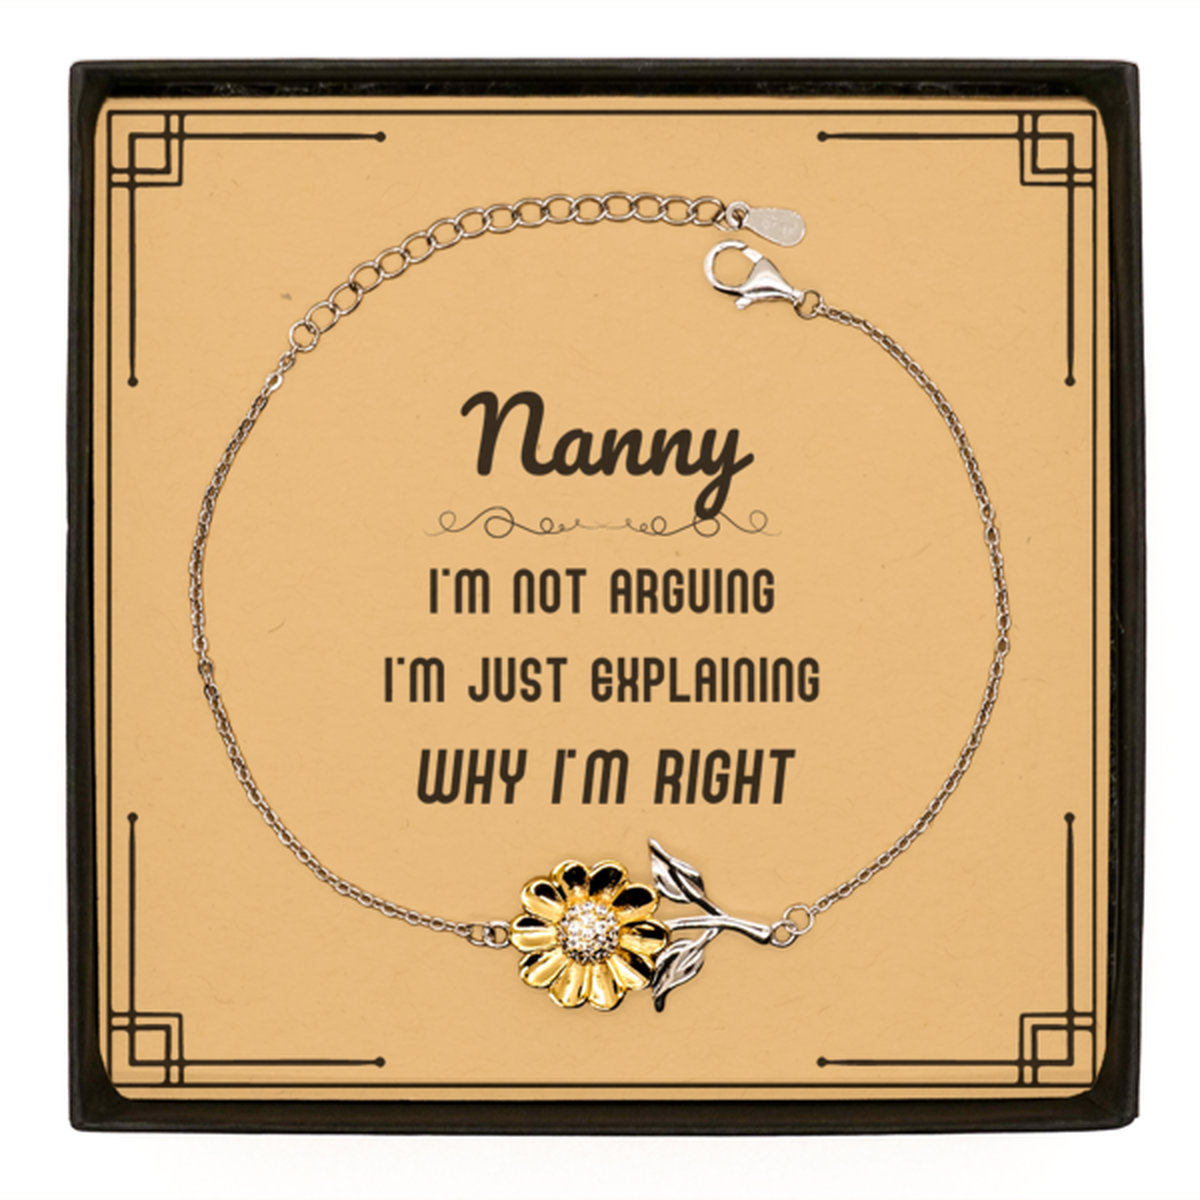 Nanny I'm not Arguing. I'm Just Explaining Why I'm RIGHT Sunflower Bracelet, Funny Saying Quote Nanny Gifts For Nanny Message Card Graduation Birthday Christmas Gifts for Men Women Coworker